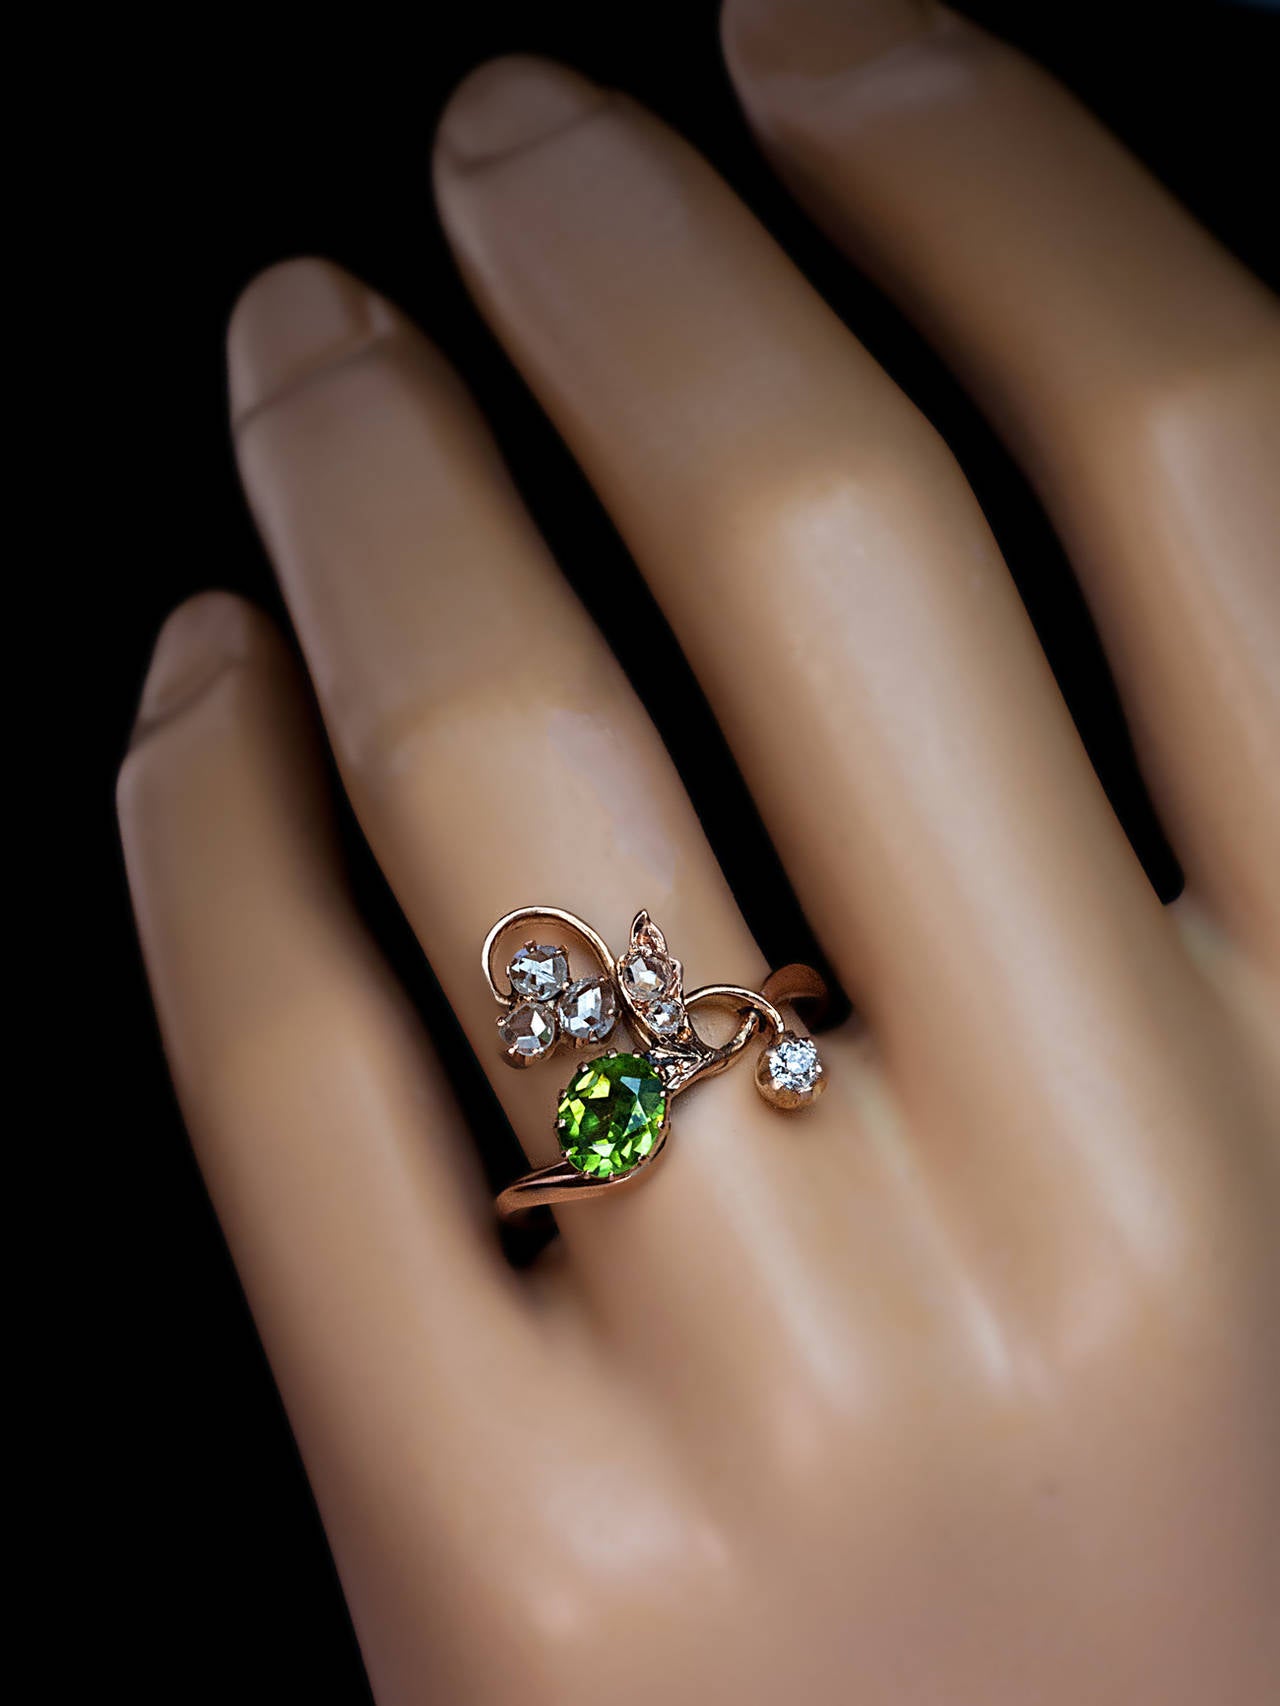 Made in Kazan between 1899 and 1908.

The ring features an excellent sparkling green 0.77 ct demantoid garnet with a superb well-defined 